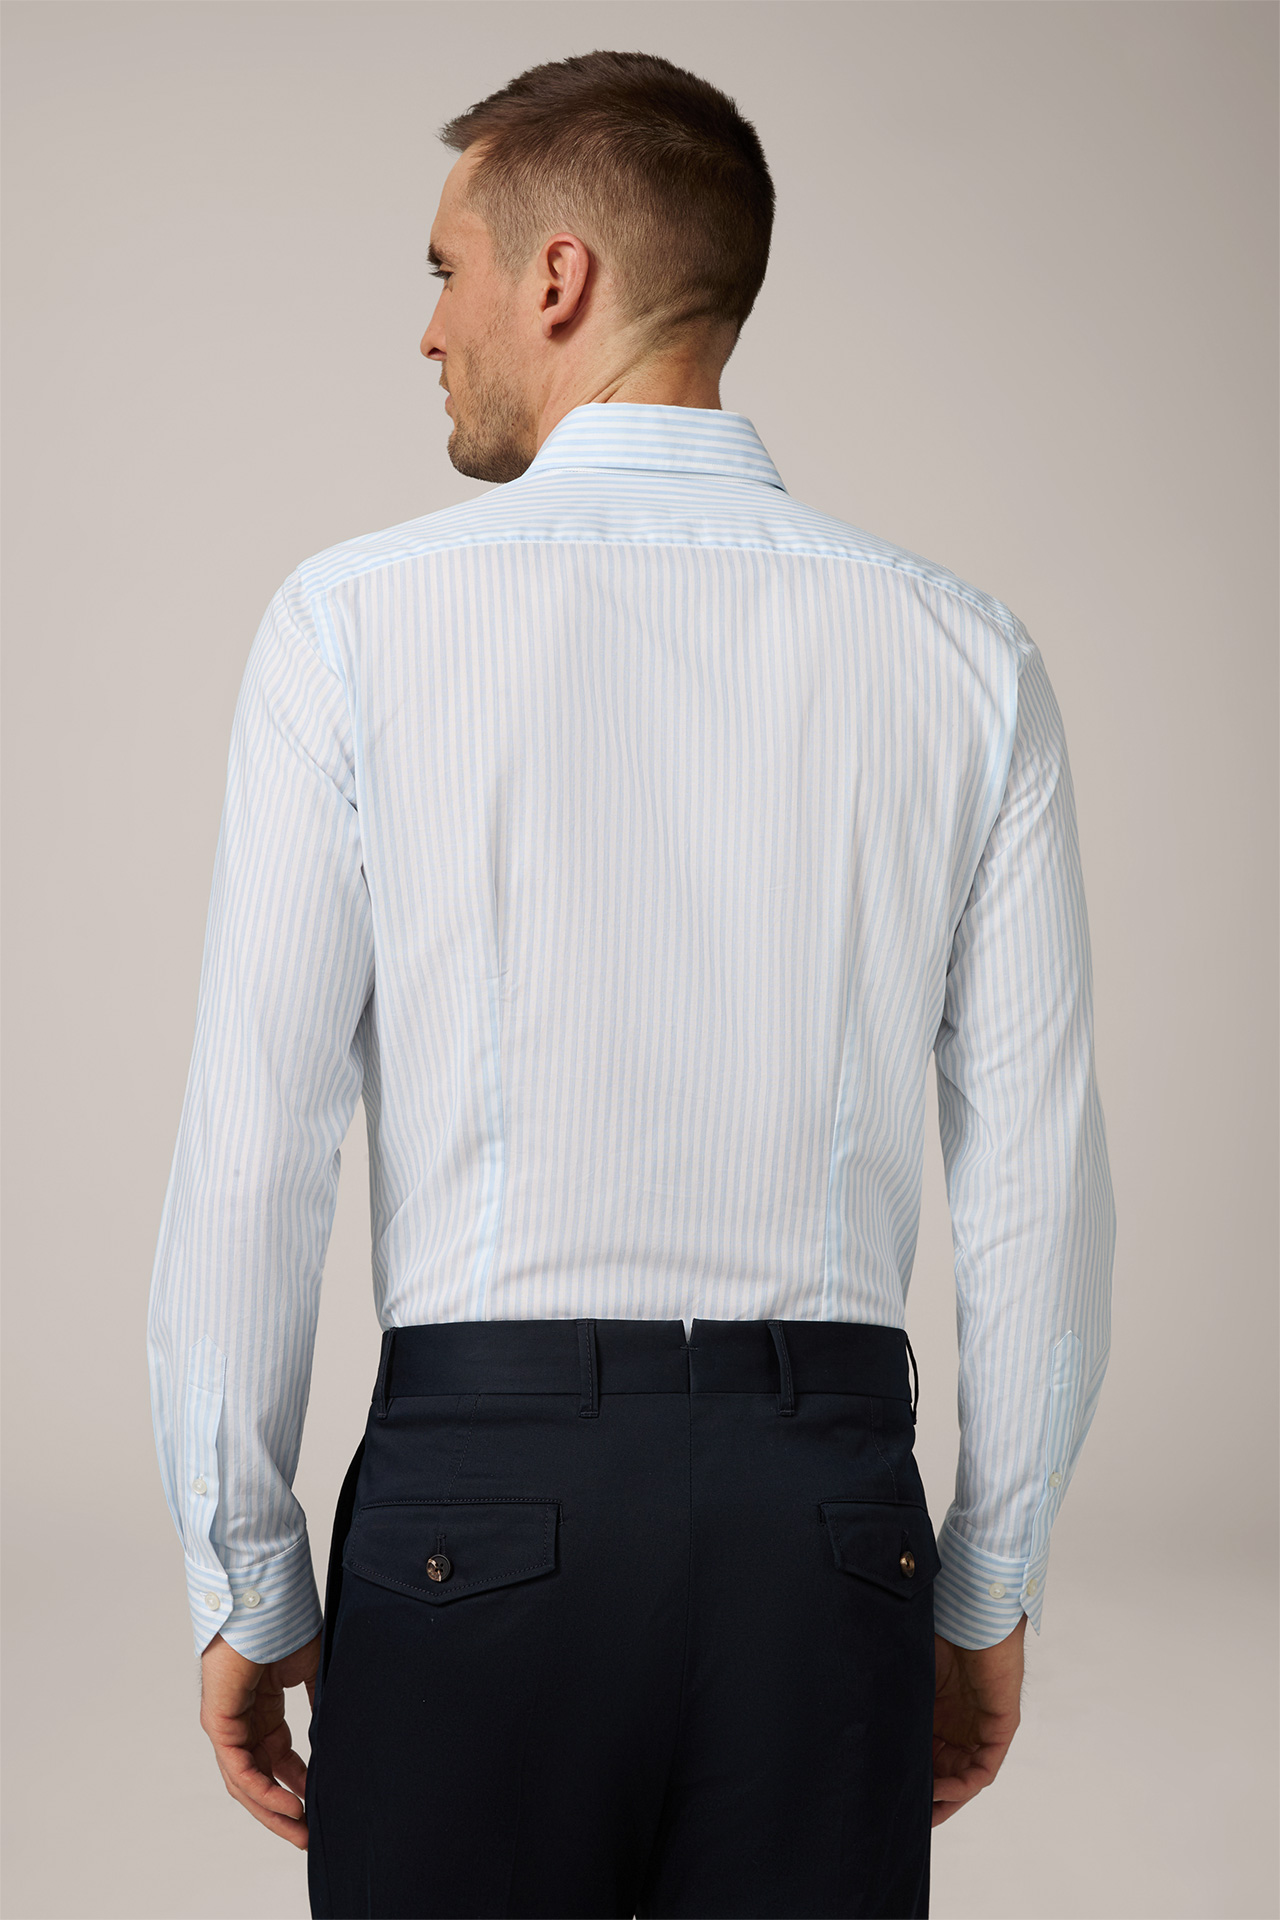 Lano Cotton Shirt in Blue and White Striped